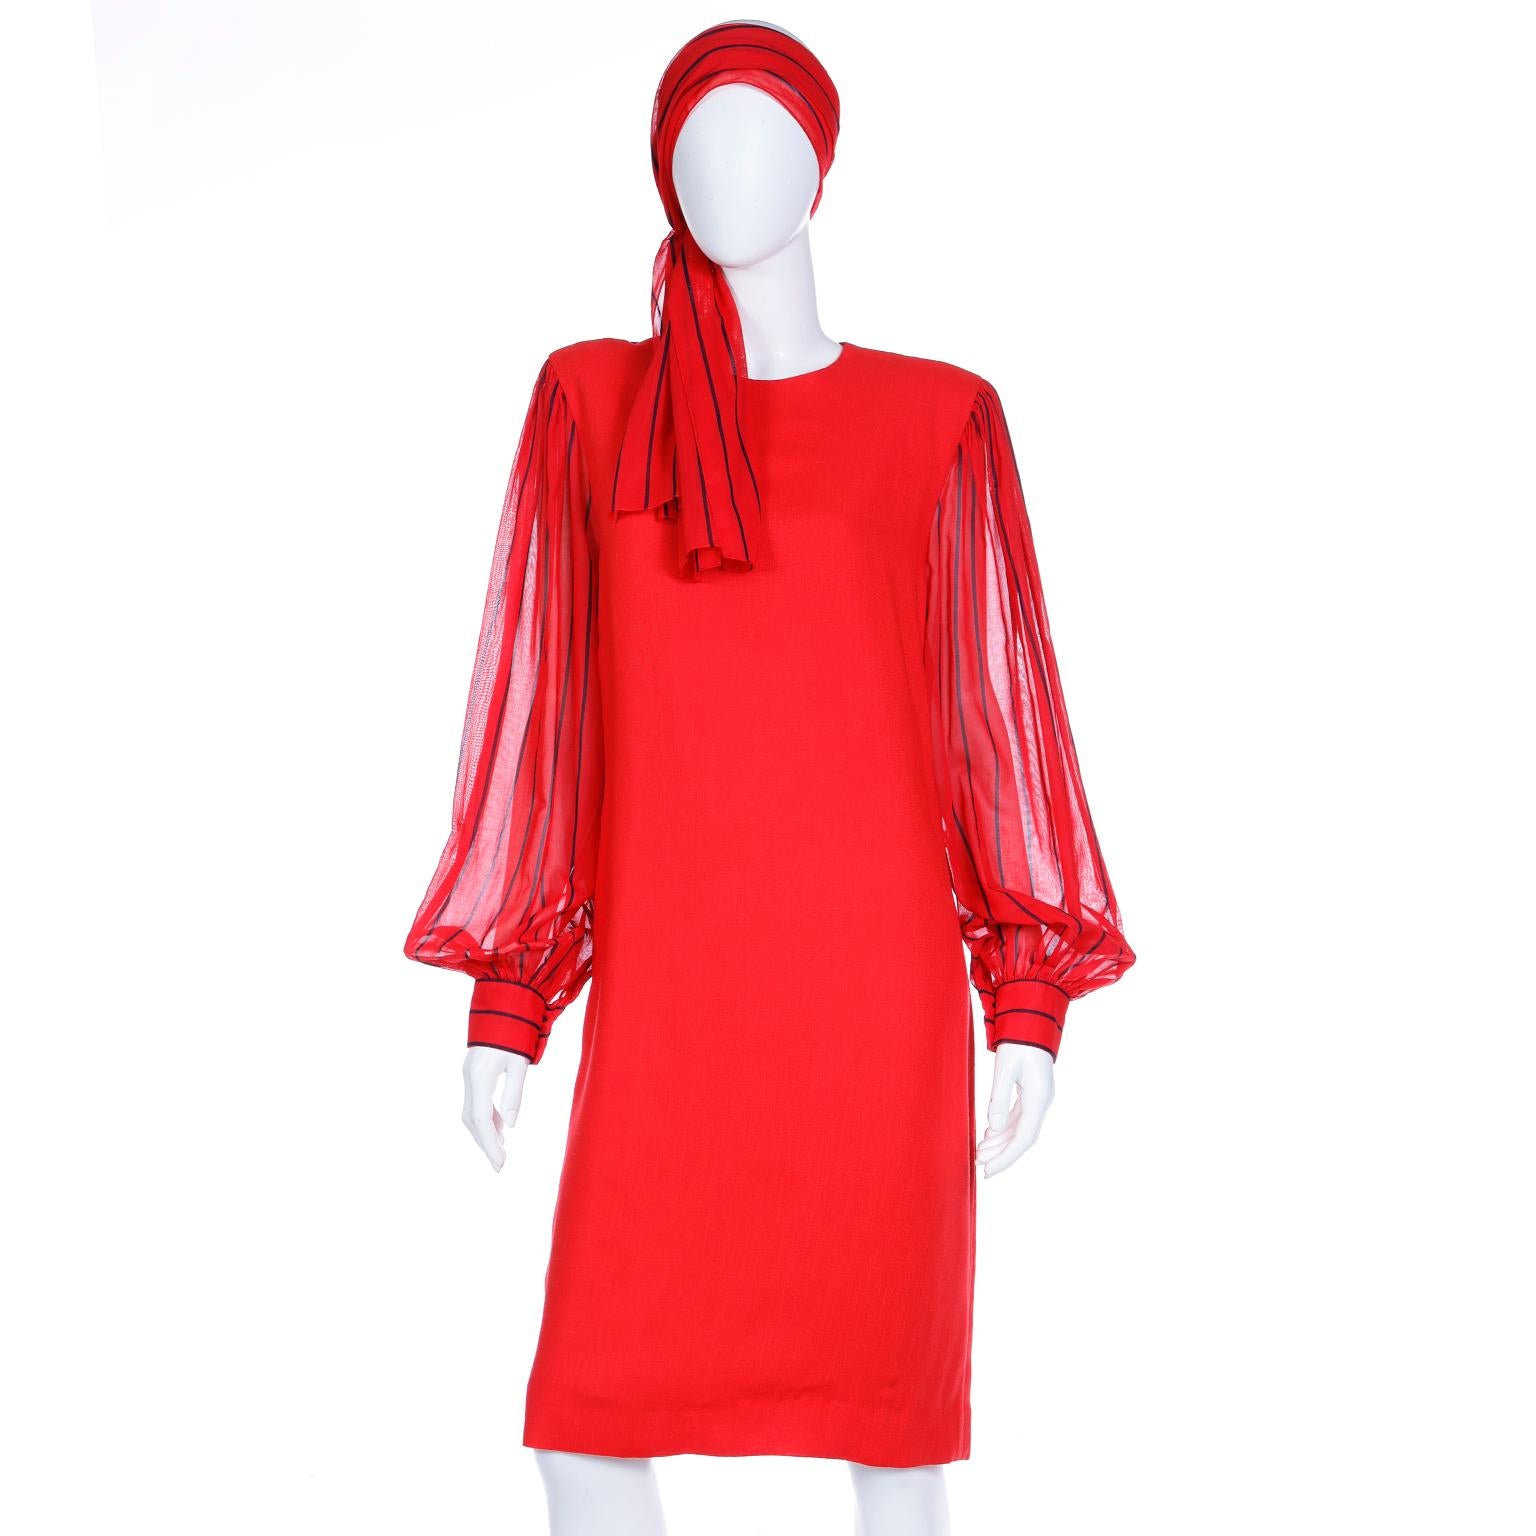 This is a beautiful vintage Pauline Trigere red shift dress with sheer striped sleeves. Pauline Trigere cut and draped the fabric she was using directly on actual women instead of sketching her designs. Not only was she an innovative designer, she